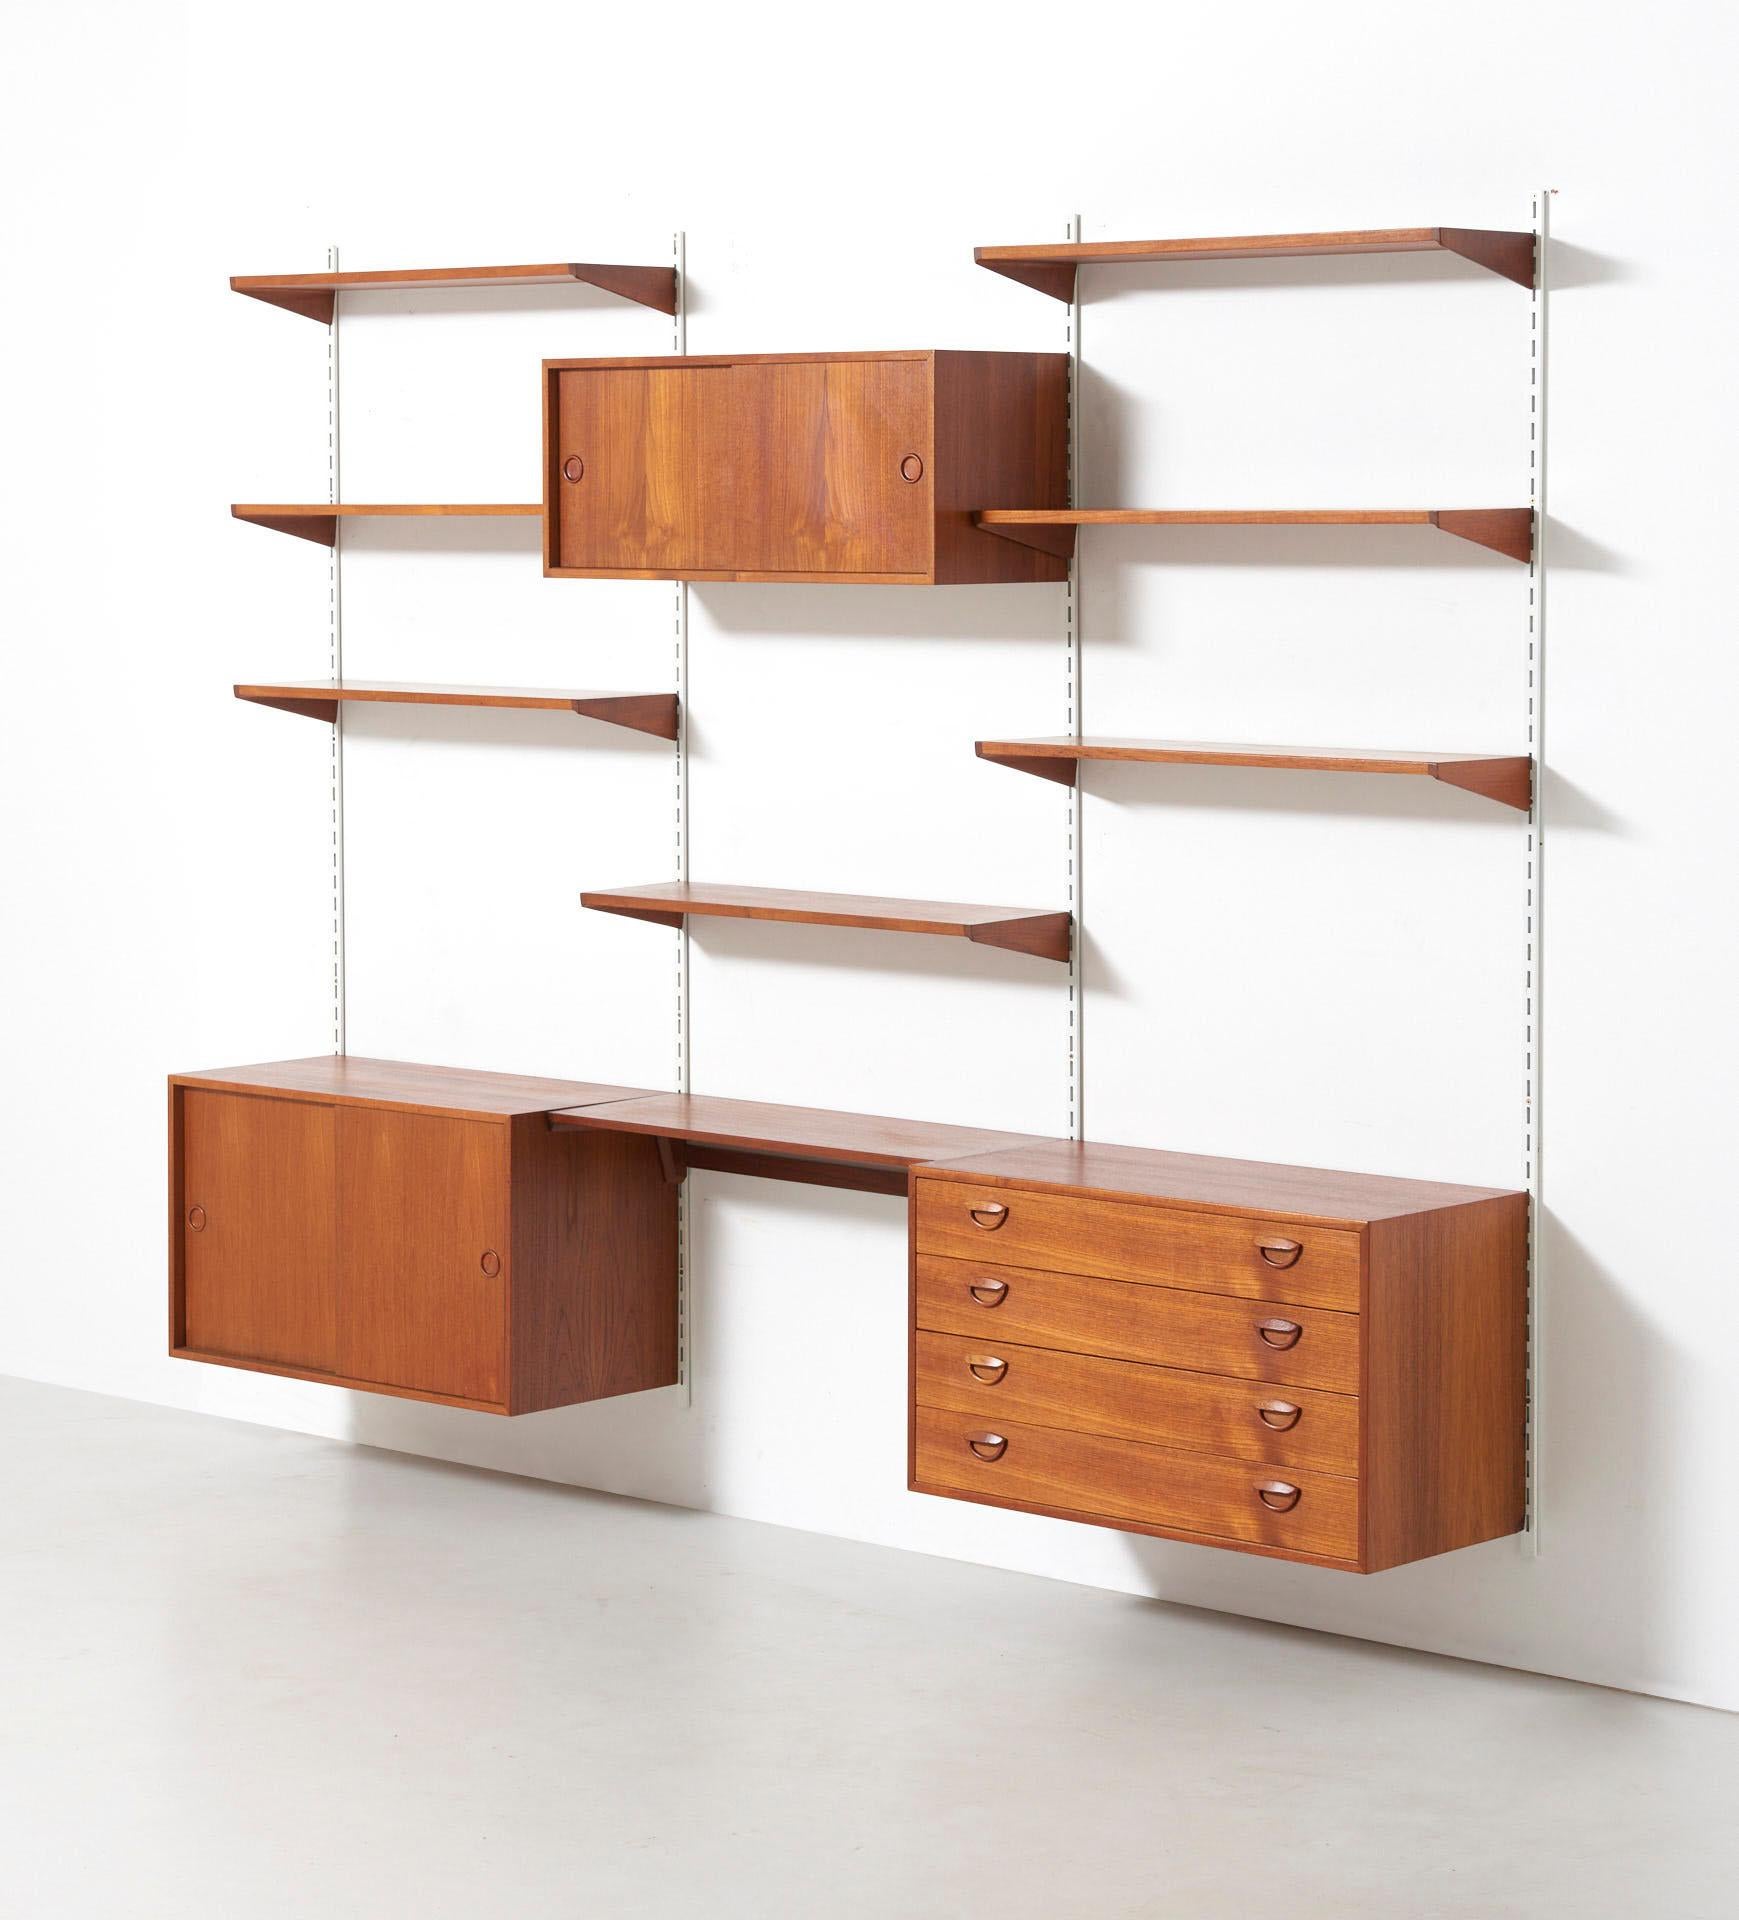 A wall unit in teak consisting of a chest of drawers, 2 cabinets and 7 shelves. Design by Kai Kristiansen in circa 1960. Made by FM (Feldballes Møbelfabrik) in Denmark.